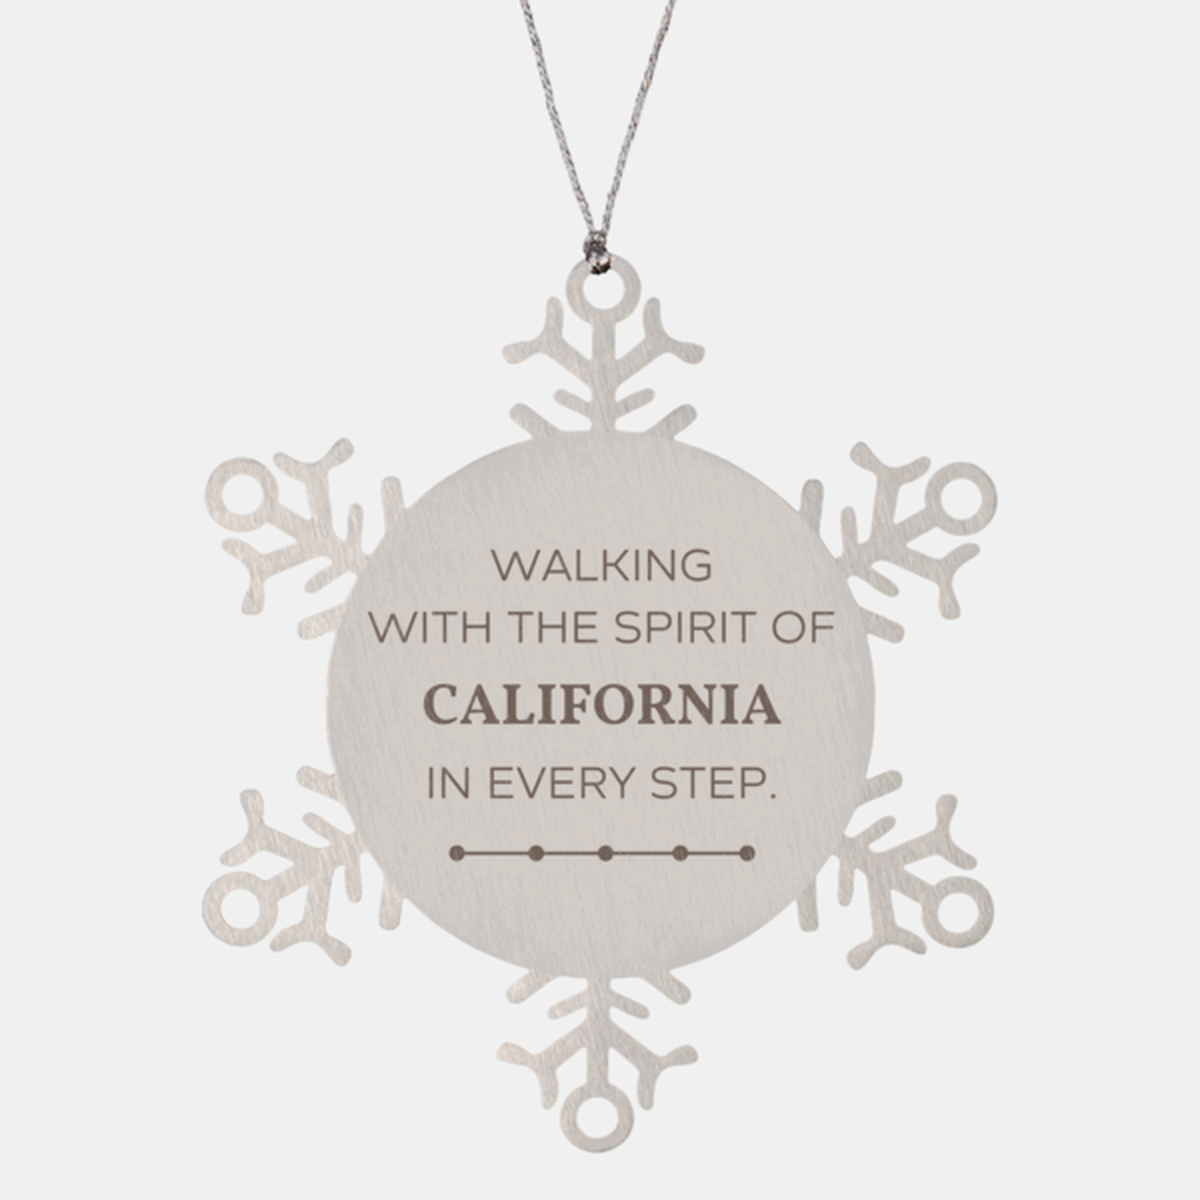 California Gifts, Walking with the spirit, Love California Birthday Christmas Snowflake Ornament For California People, Men, Women, Friends